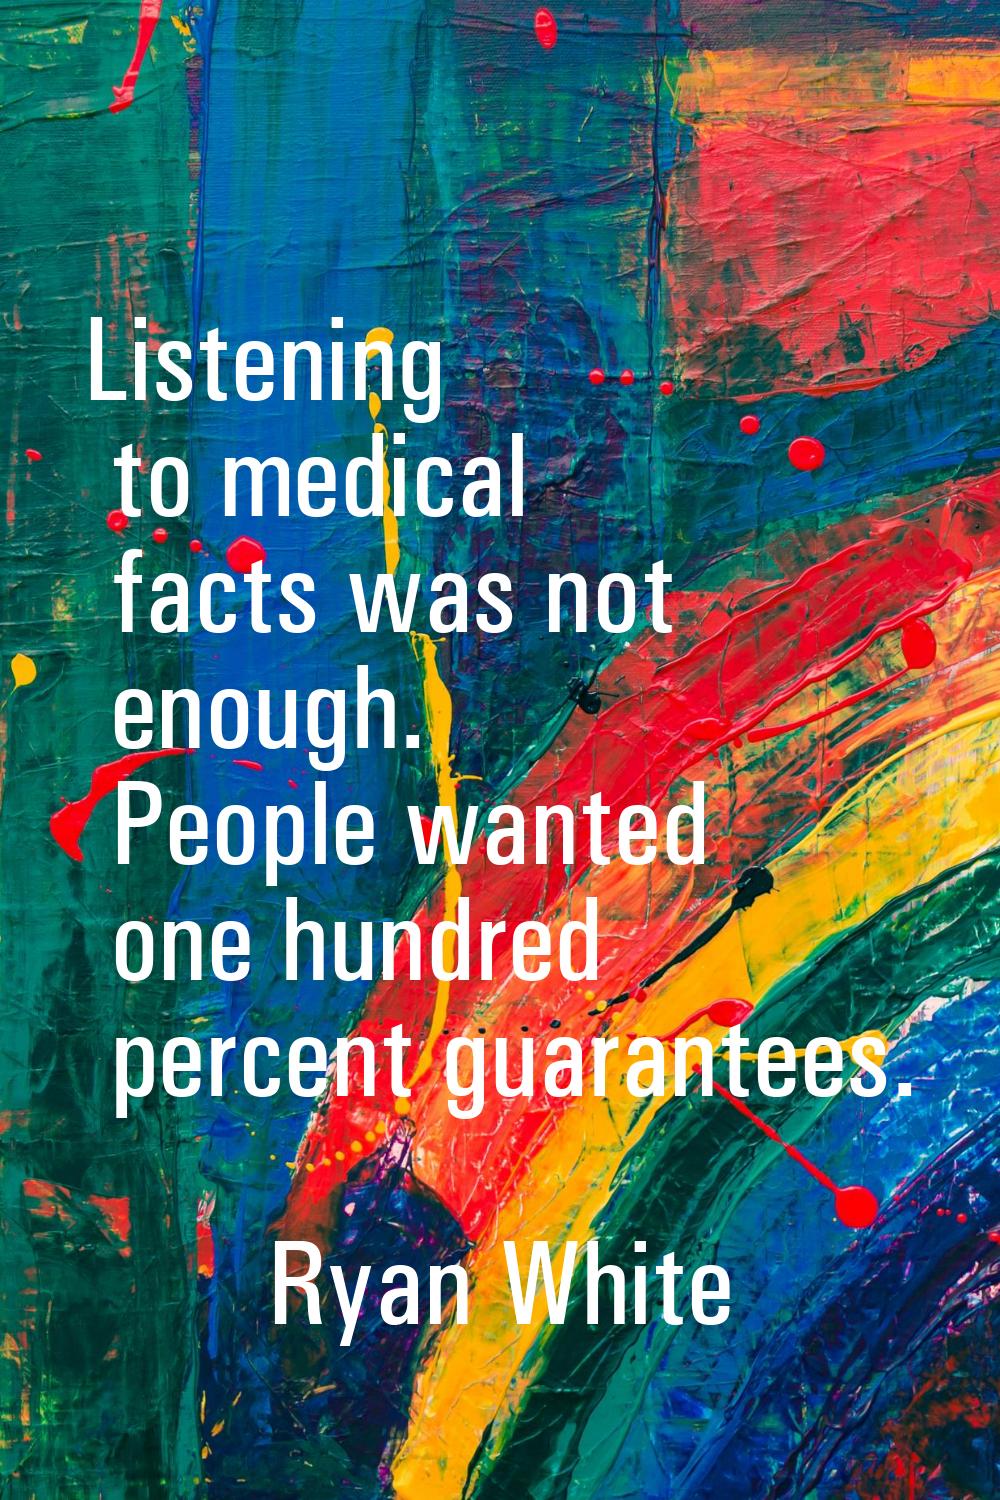 Listening to medical facts was not enough. People wanted one hundred percent guarantees.